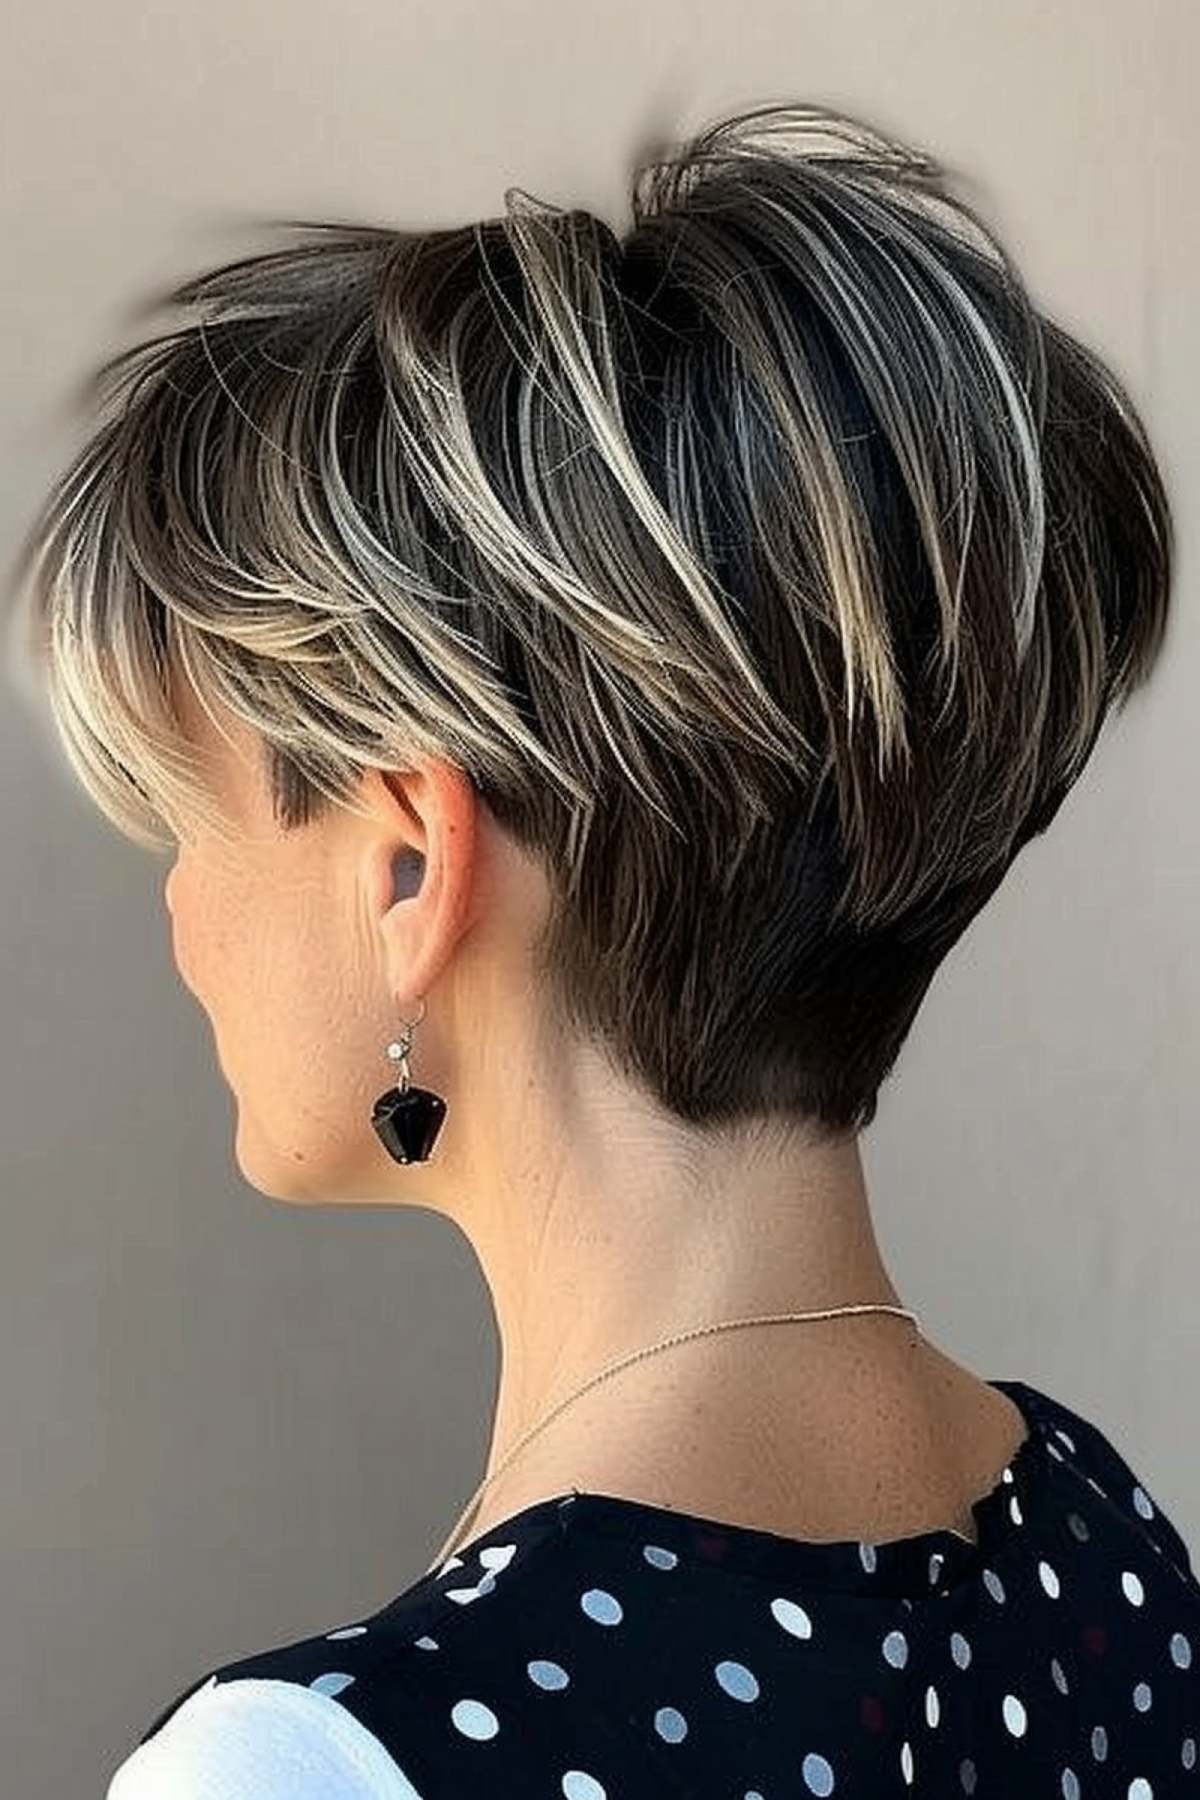 Short Pixie Wedge Cut with Highlighted Choppy Layers